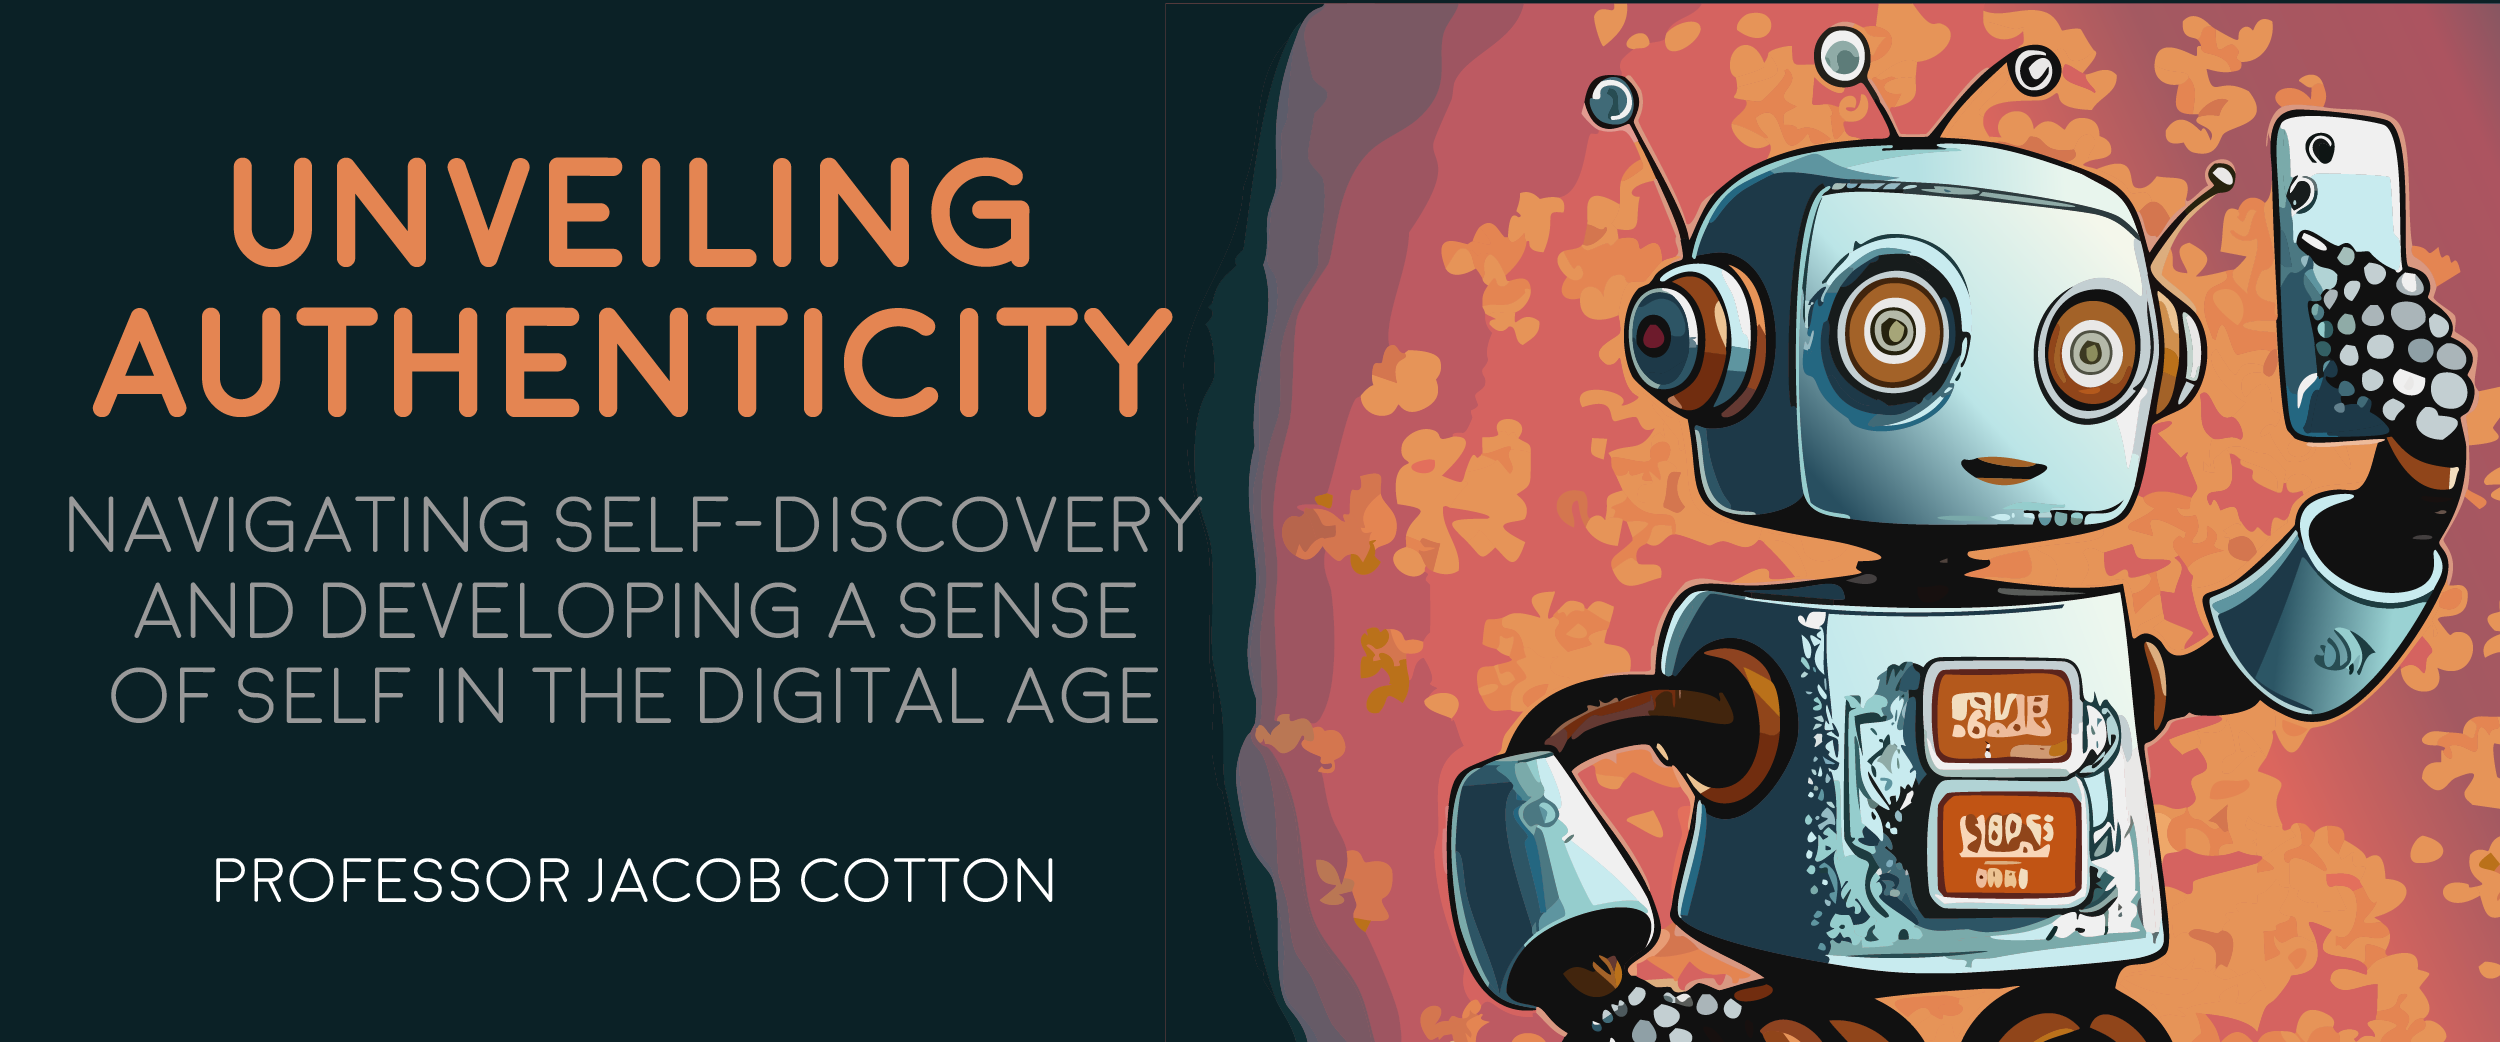 Unveiling Authenticity: Navigating Self-Discovery and Developing a Sense of Self in the Digital Age